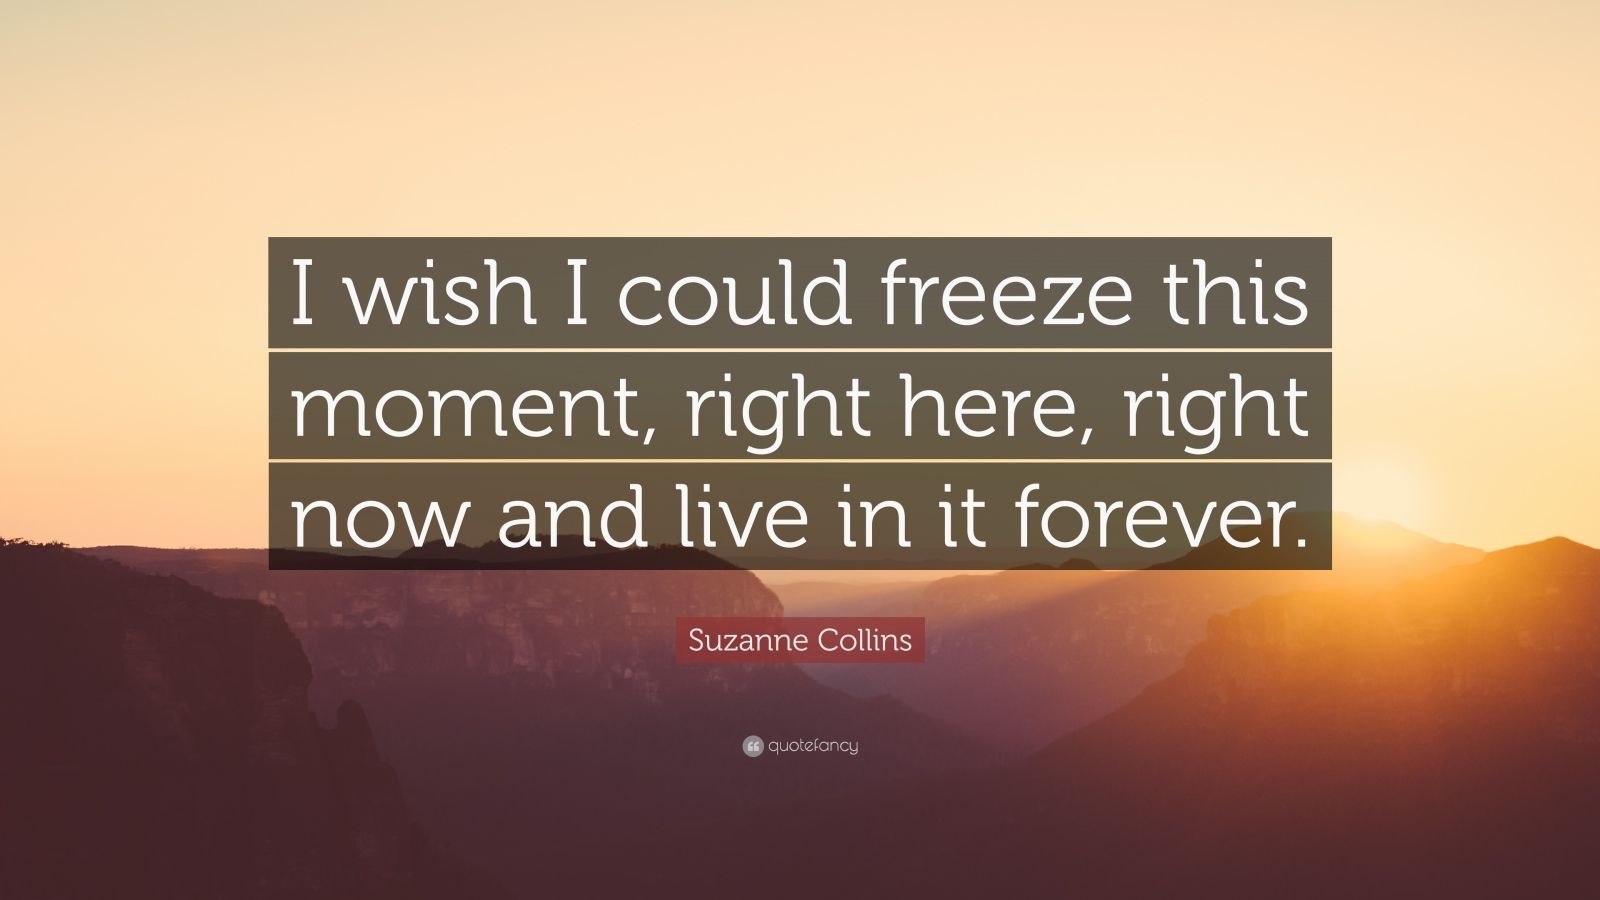 I Want to Freeze Time to Live Forever in the Precious Moments